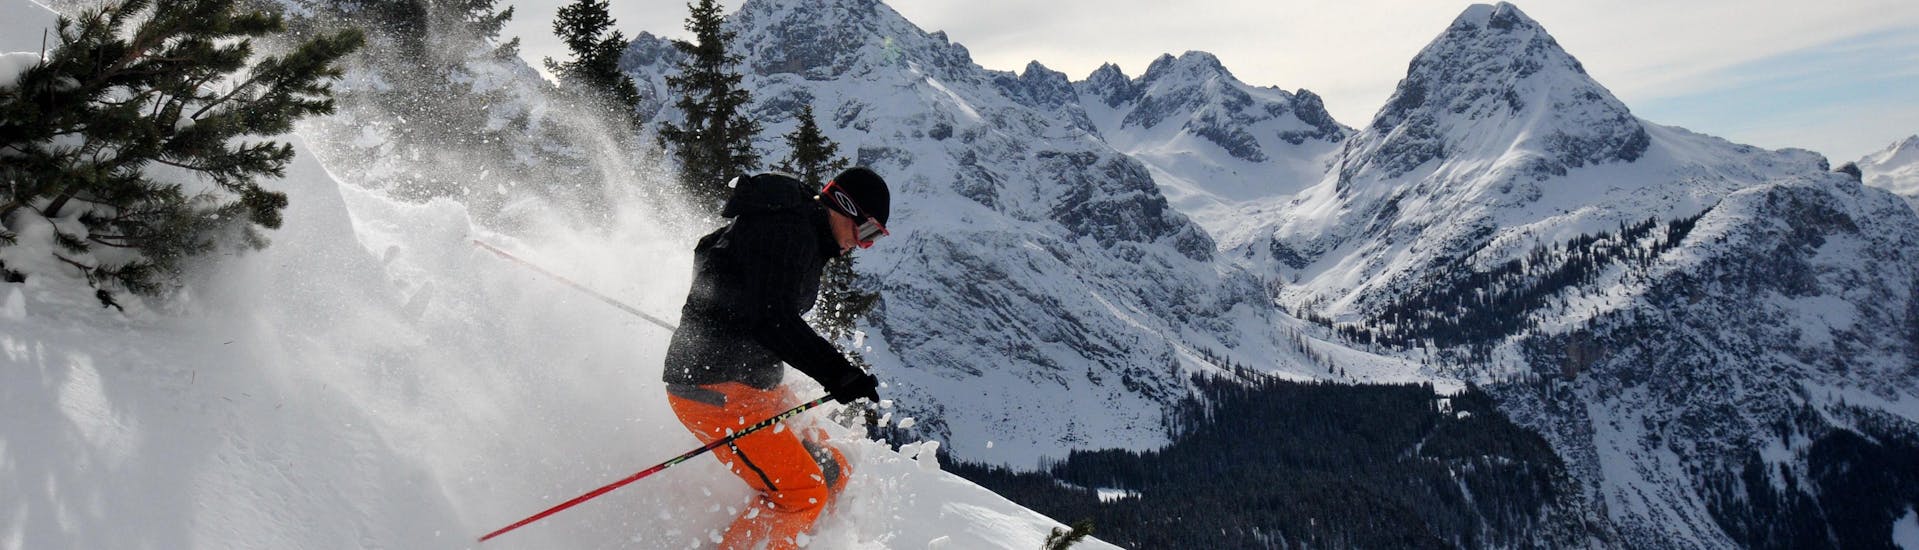 Private Ski Lessons for Adults - All Levels with Peter Krinninger - Hero image